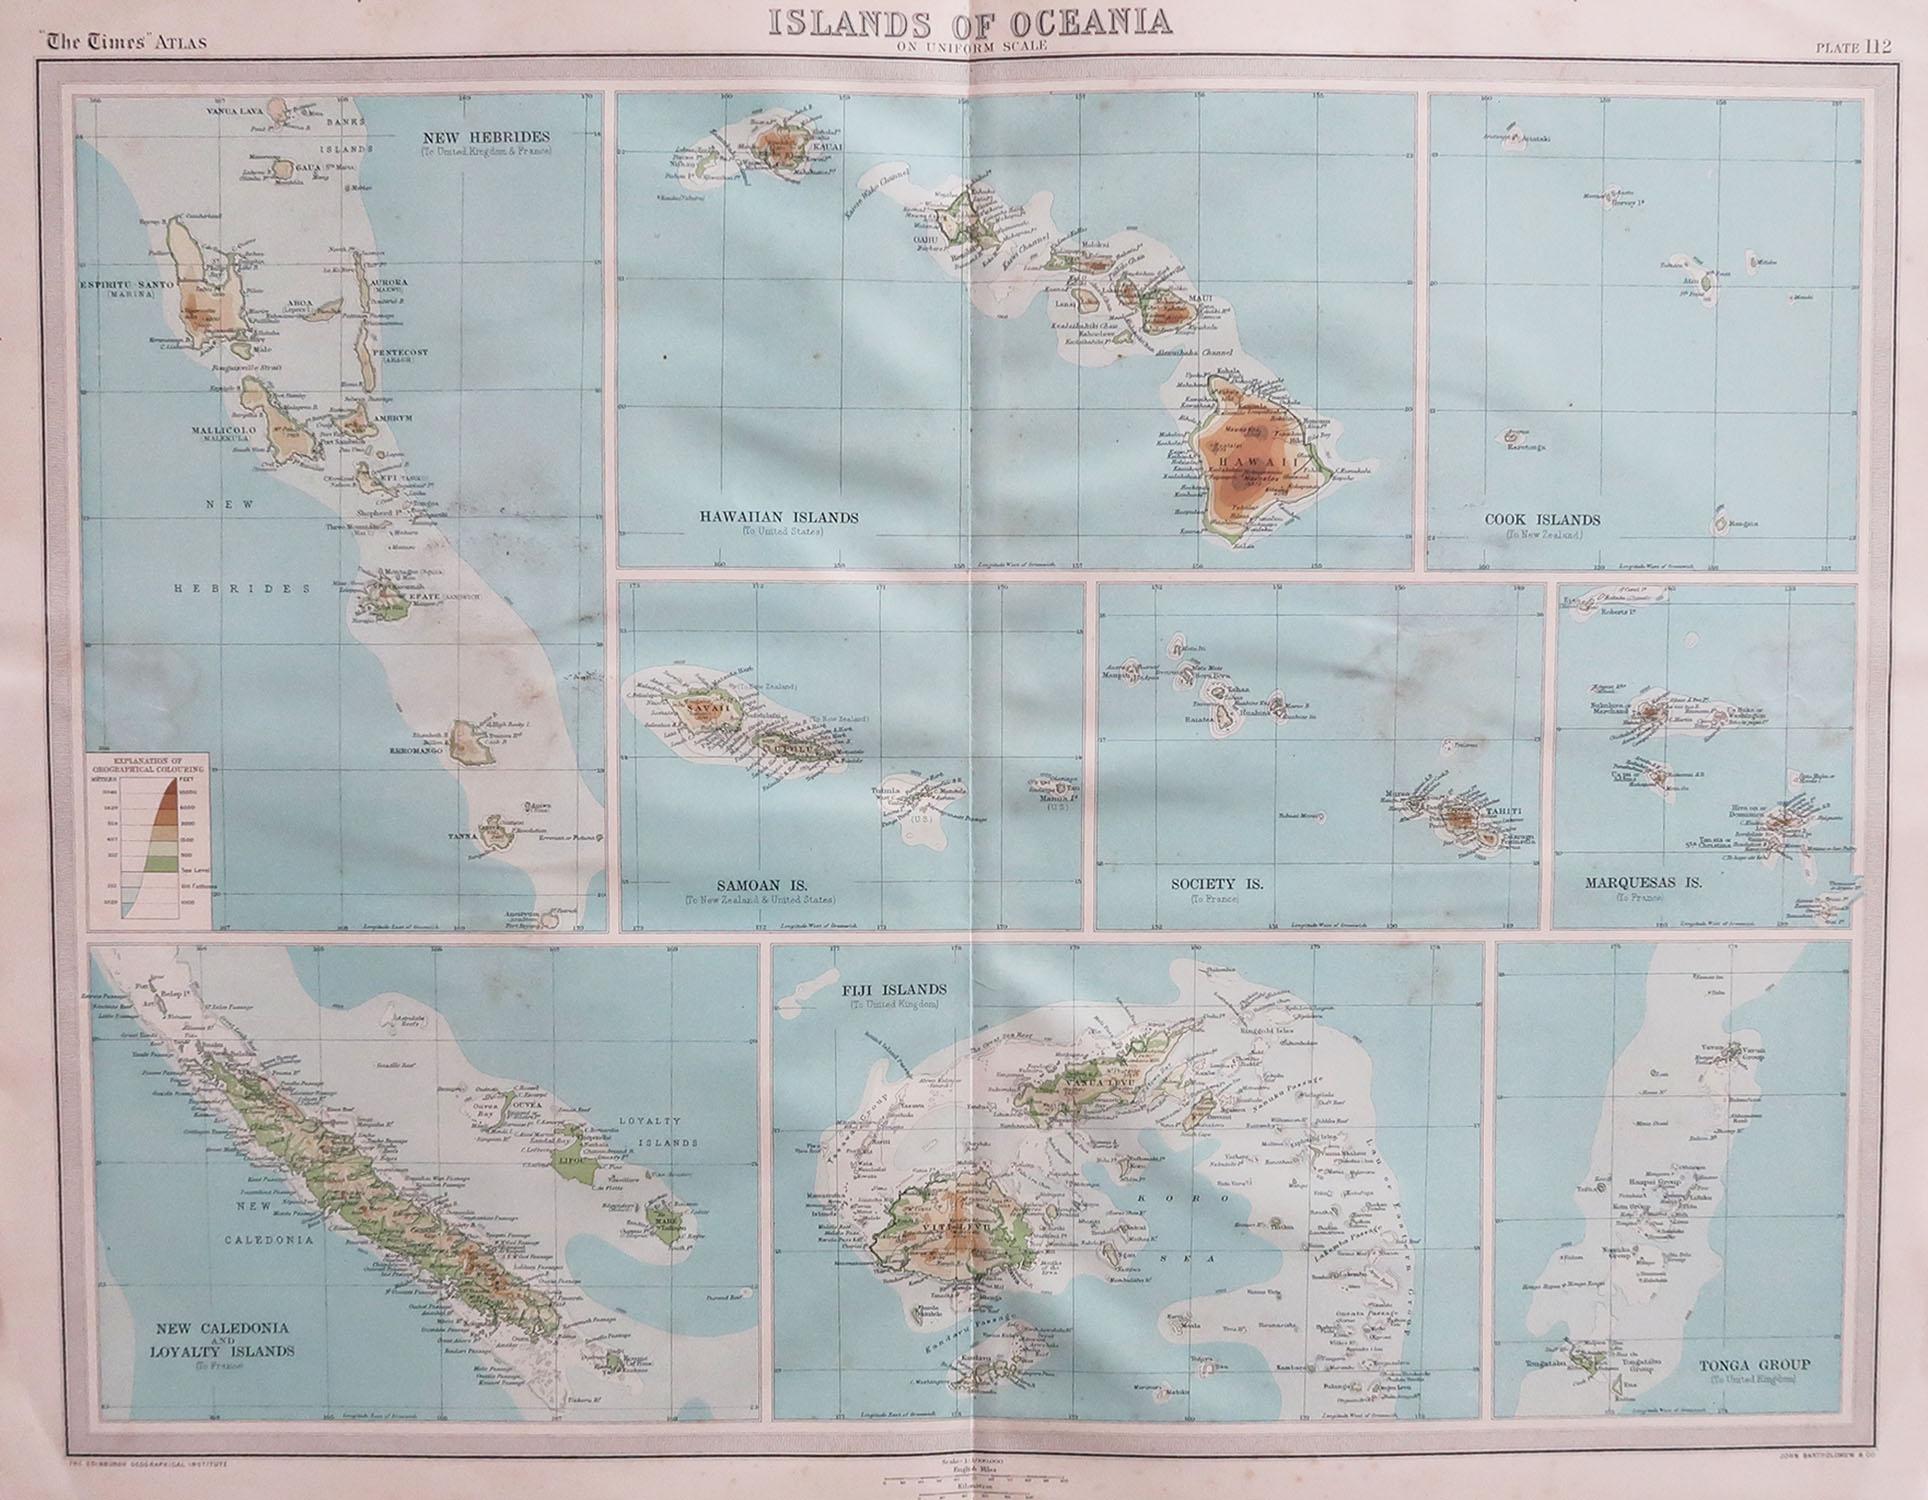 Great map of The Pacific Islands

Unframed

Original color

By John Bartholomew and Co. Edinburgh Geographical Institute

Published, circa 1920

Free shipping.
 